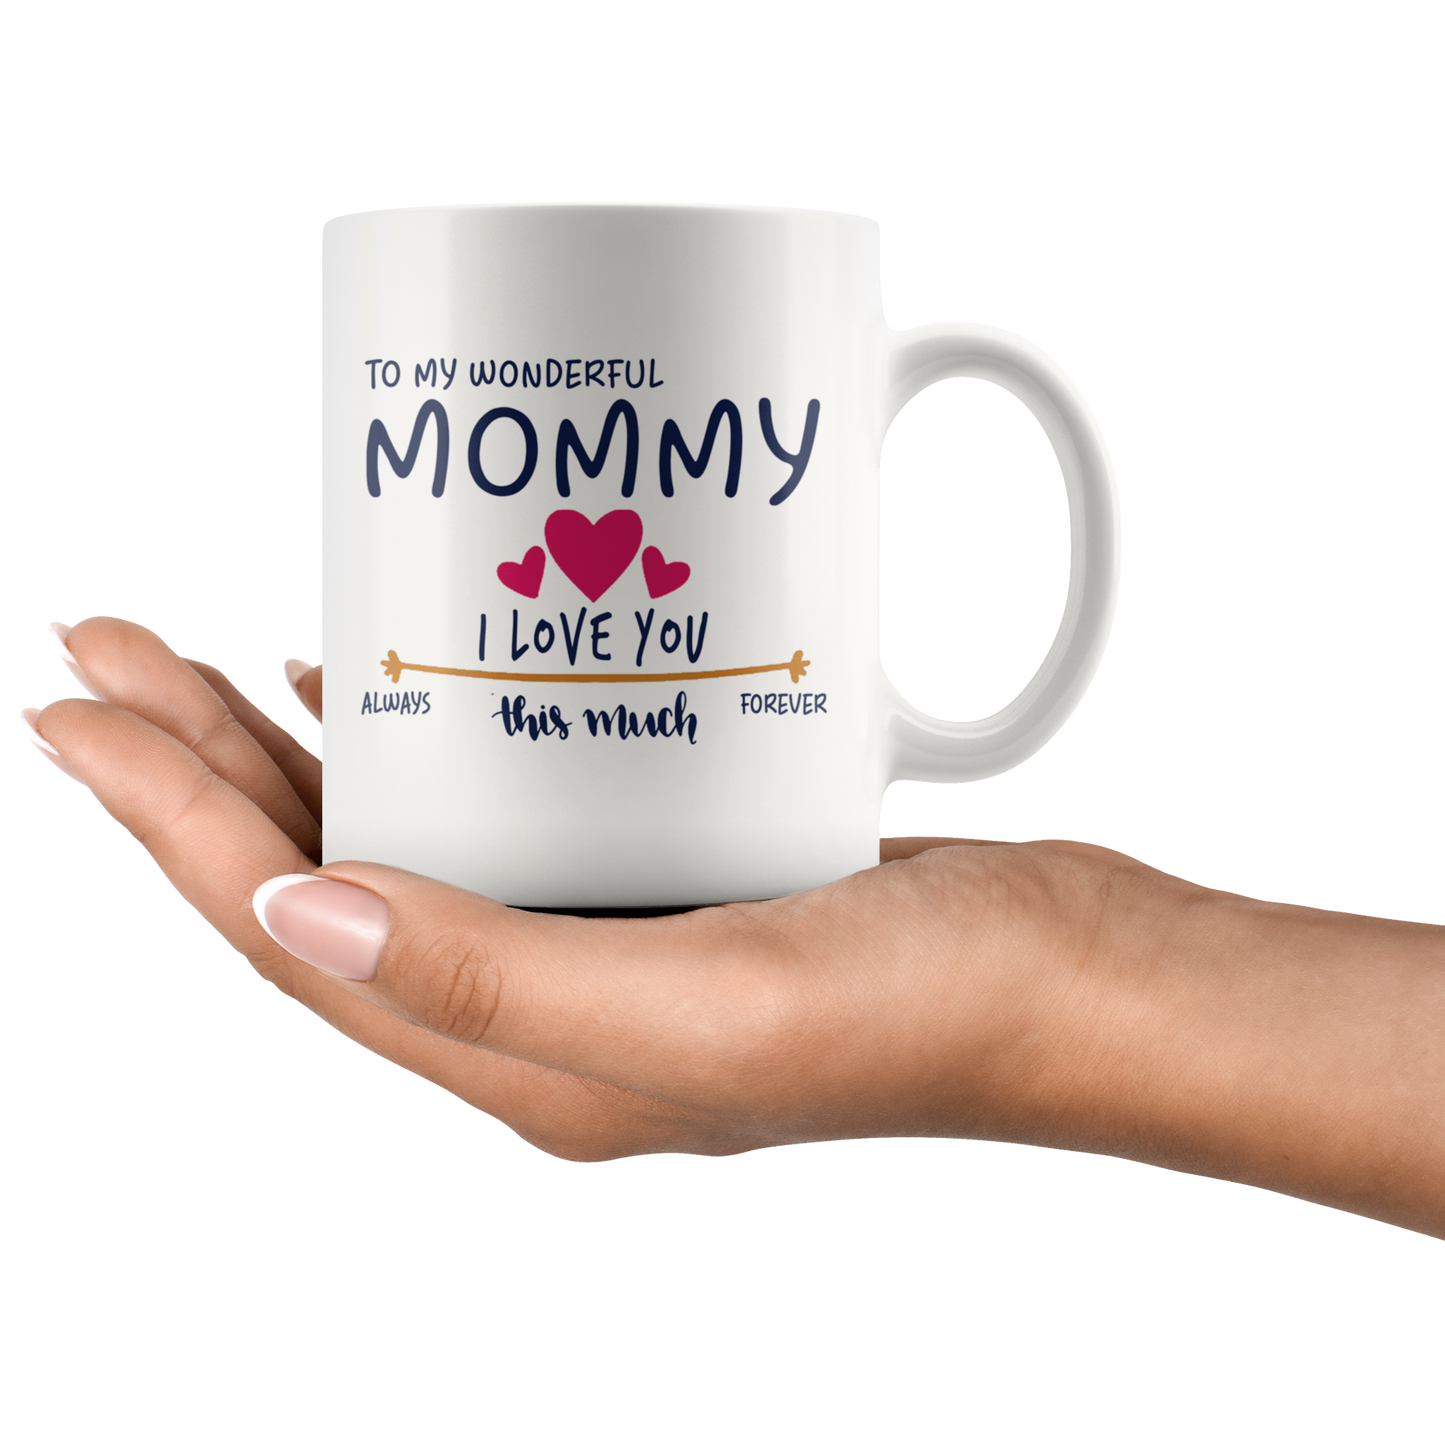 M-20470216-sp-25553 - [ Mommy | 1 ] (mug_11oz_white) Mom Day Gifts From Daughter or Son - To My Wonderful Mommy I